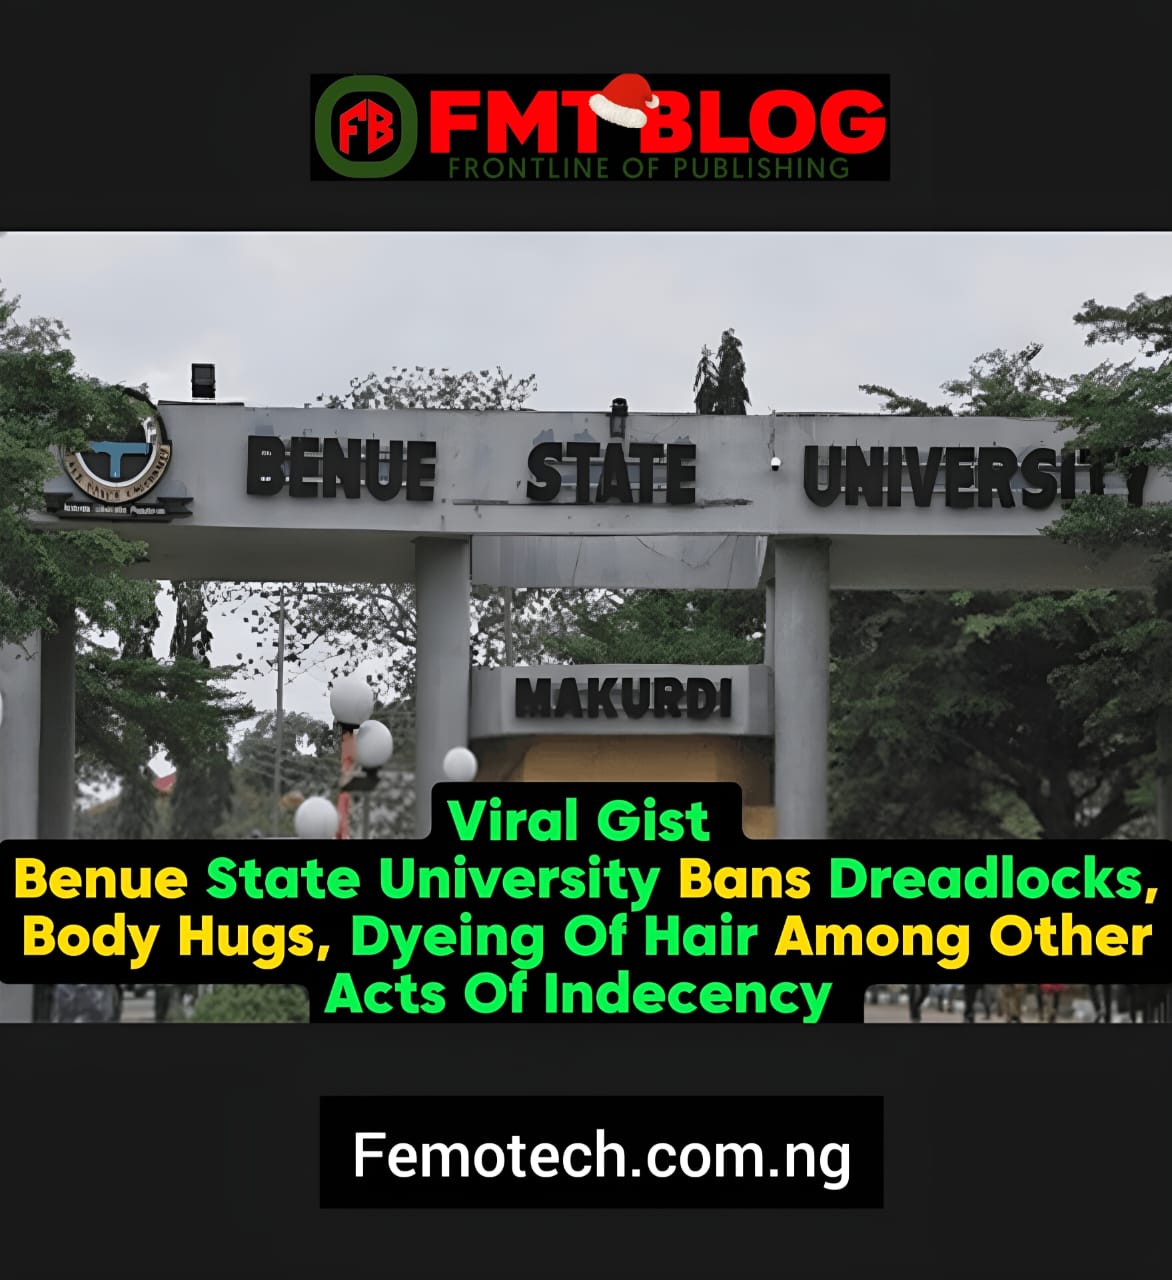 Benue State University Bans Dreadlocks, Body Hugs, Dyeing Of Hair Among Other Acts Of Indecency